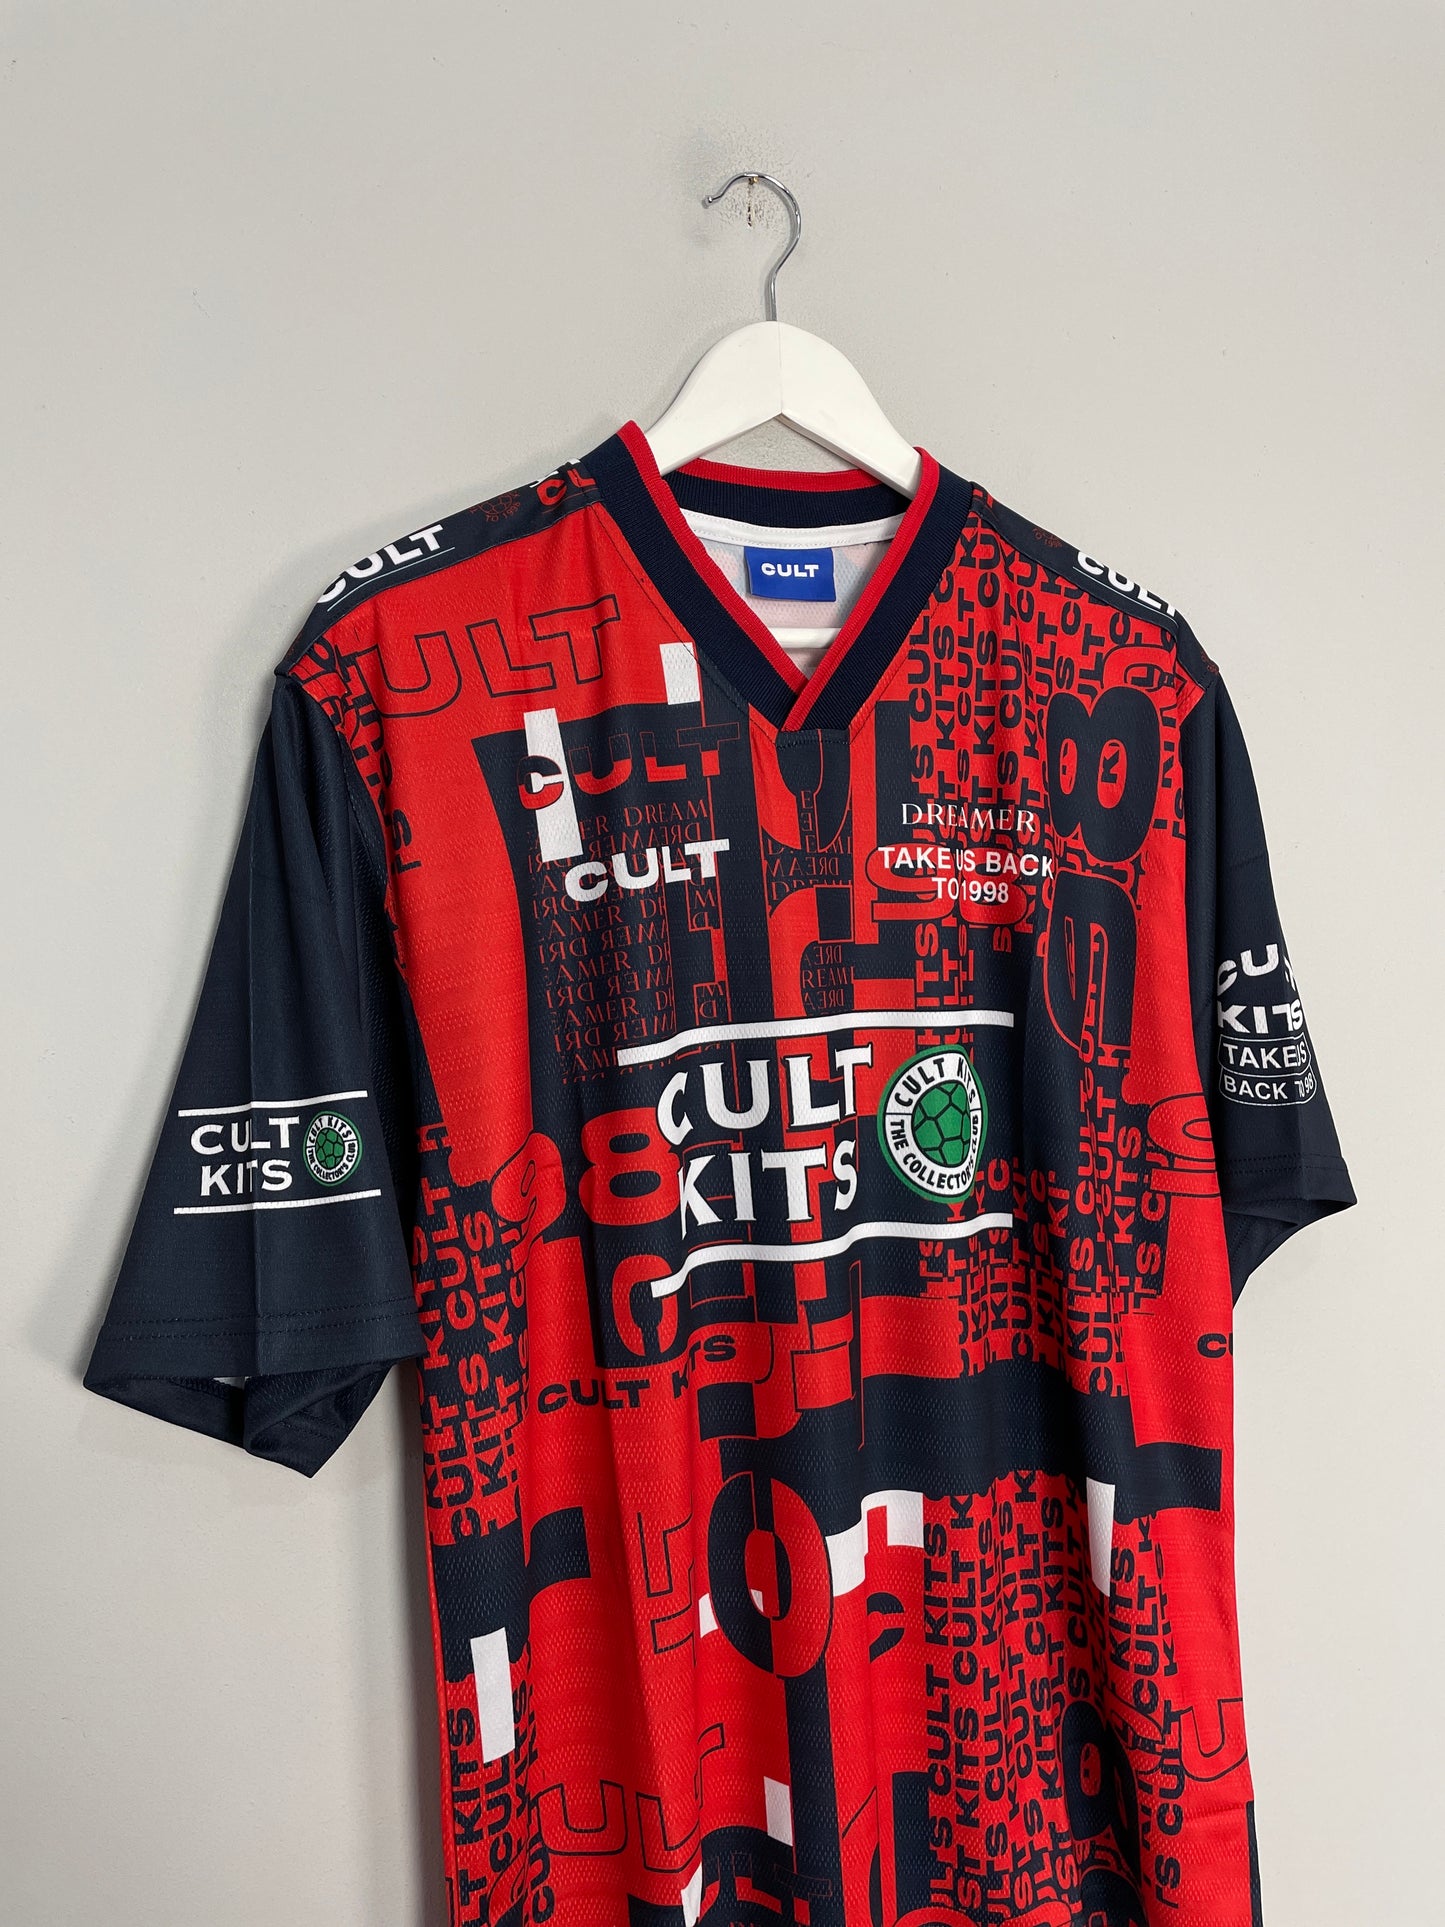 1998 DREAMERS TRAINING SHIRT 'ENGLAND' (MULTIPLE SIZES) CULT